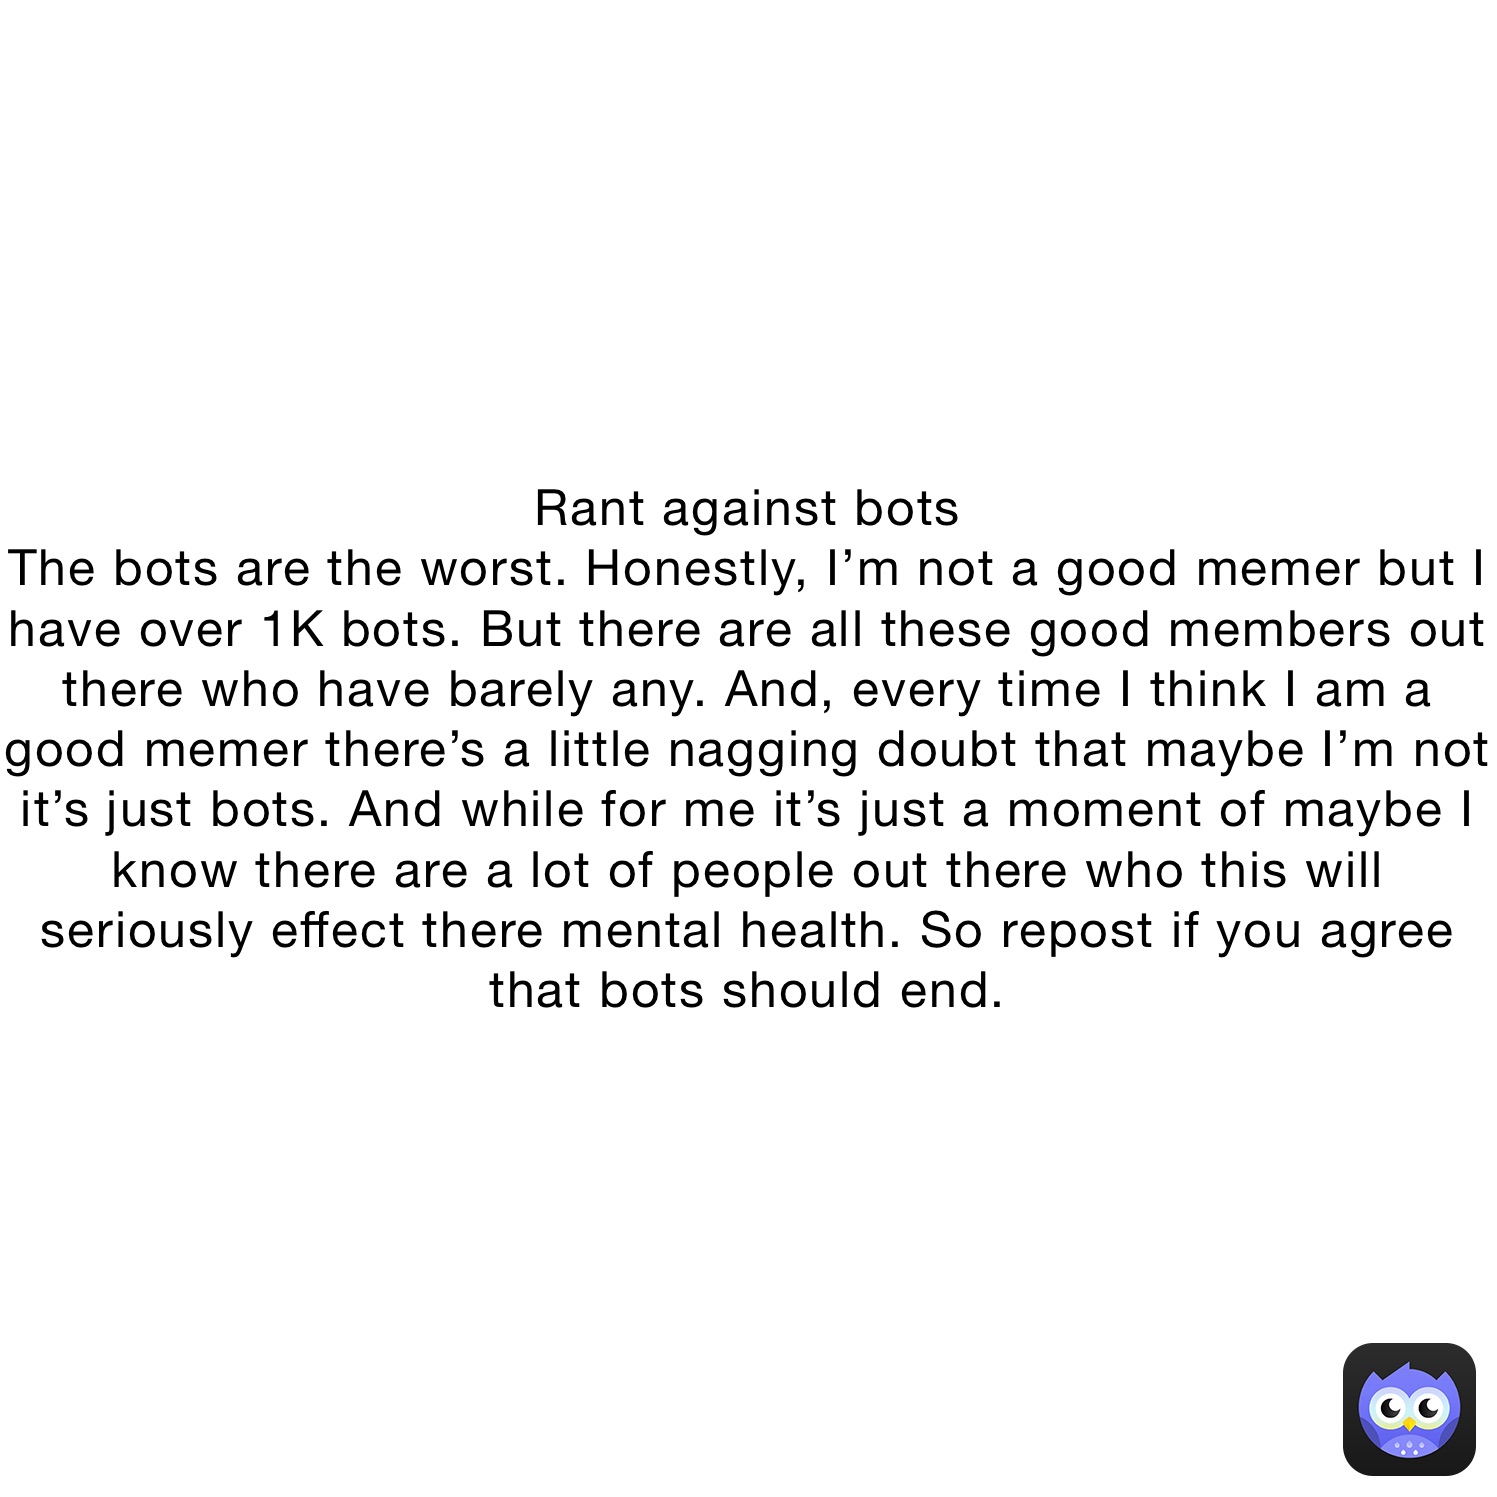 Rant against bots
The bots are the worst. Honestly, I’m not a good memer but I have over 1K bots. But there are all these good members out there who have barely any. And, every time I think I am a good memer there’s a little nagging doubt that maybe I’m not it’s just bots. And while for me it’s just a moment of maybe I know there are a lot of people out there who this will seriously effect there mental health. So repost if you agree that bots should end.